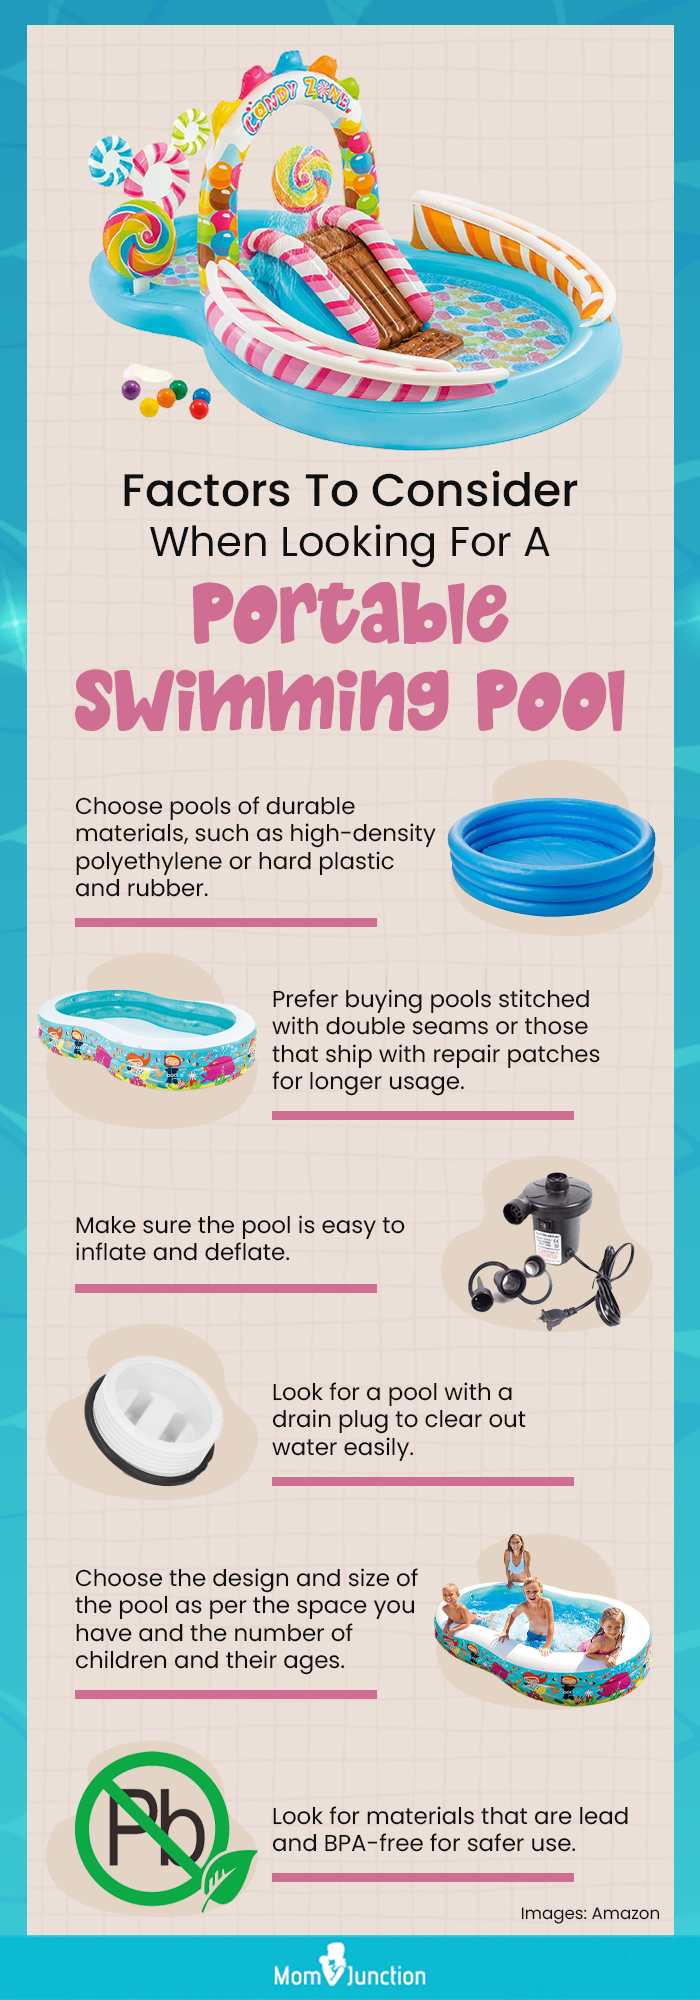 Factors To Consider When Looking For A Portable Swimming Pool (infographic)